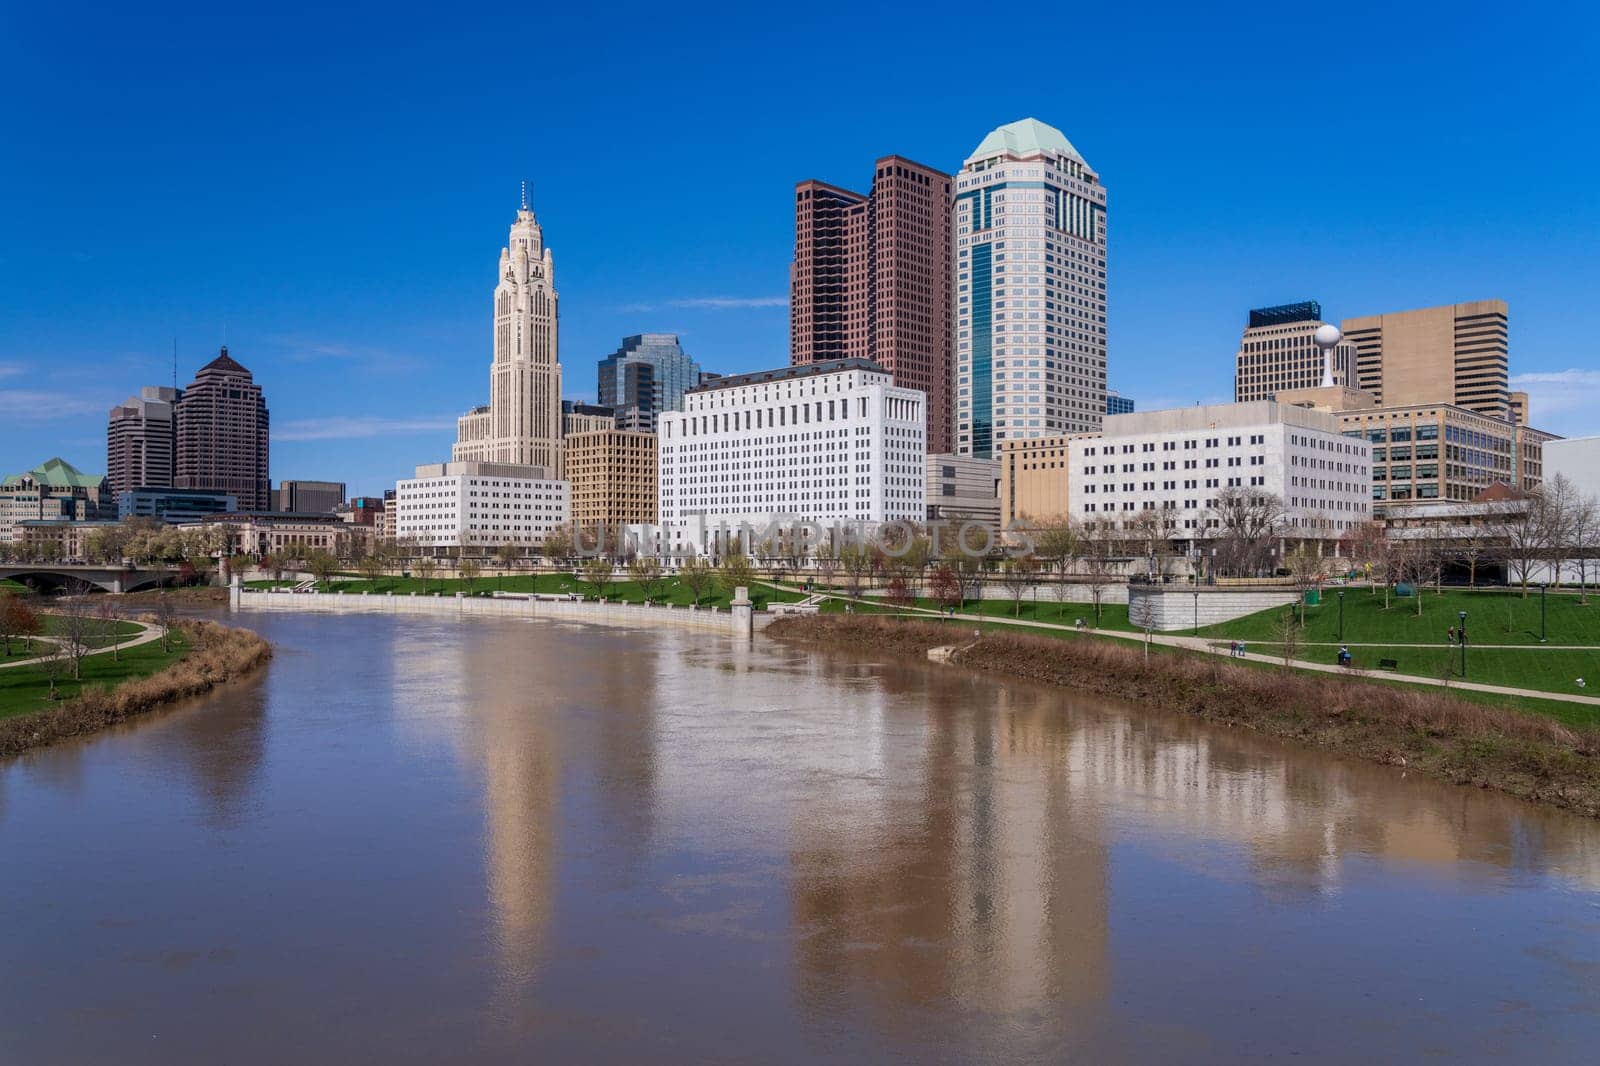 Columbus Ohio waterfront skyline after flood on river scioto by steheap